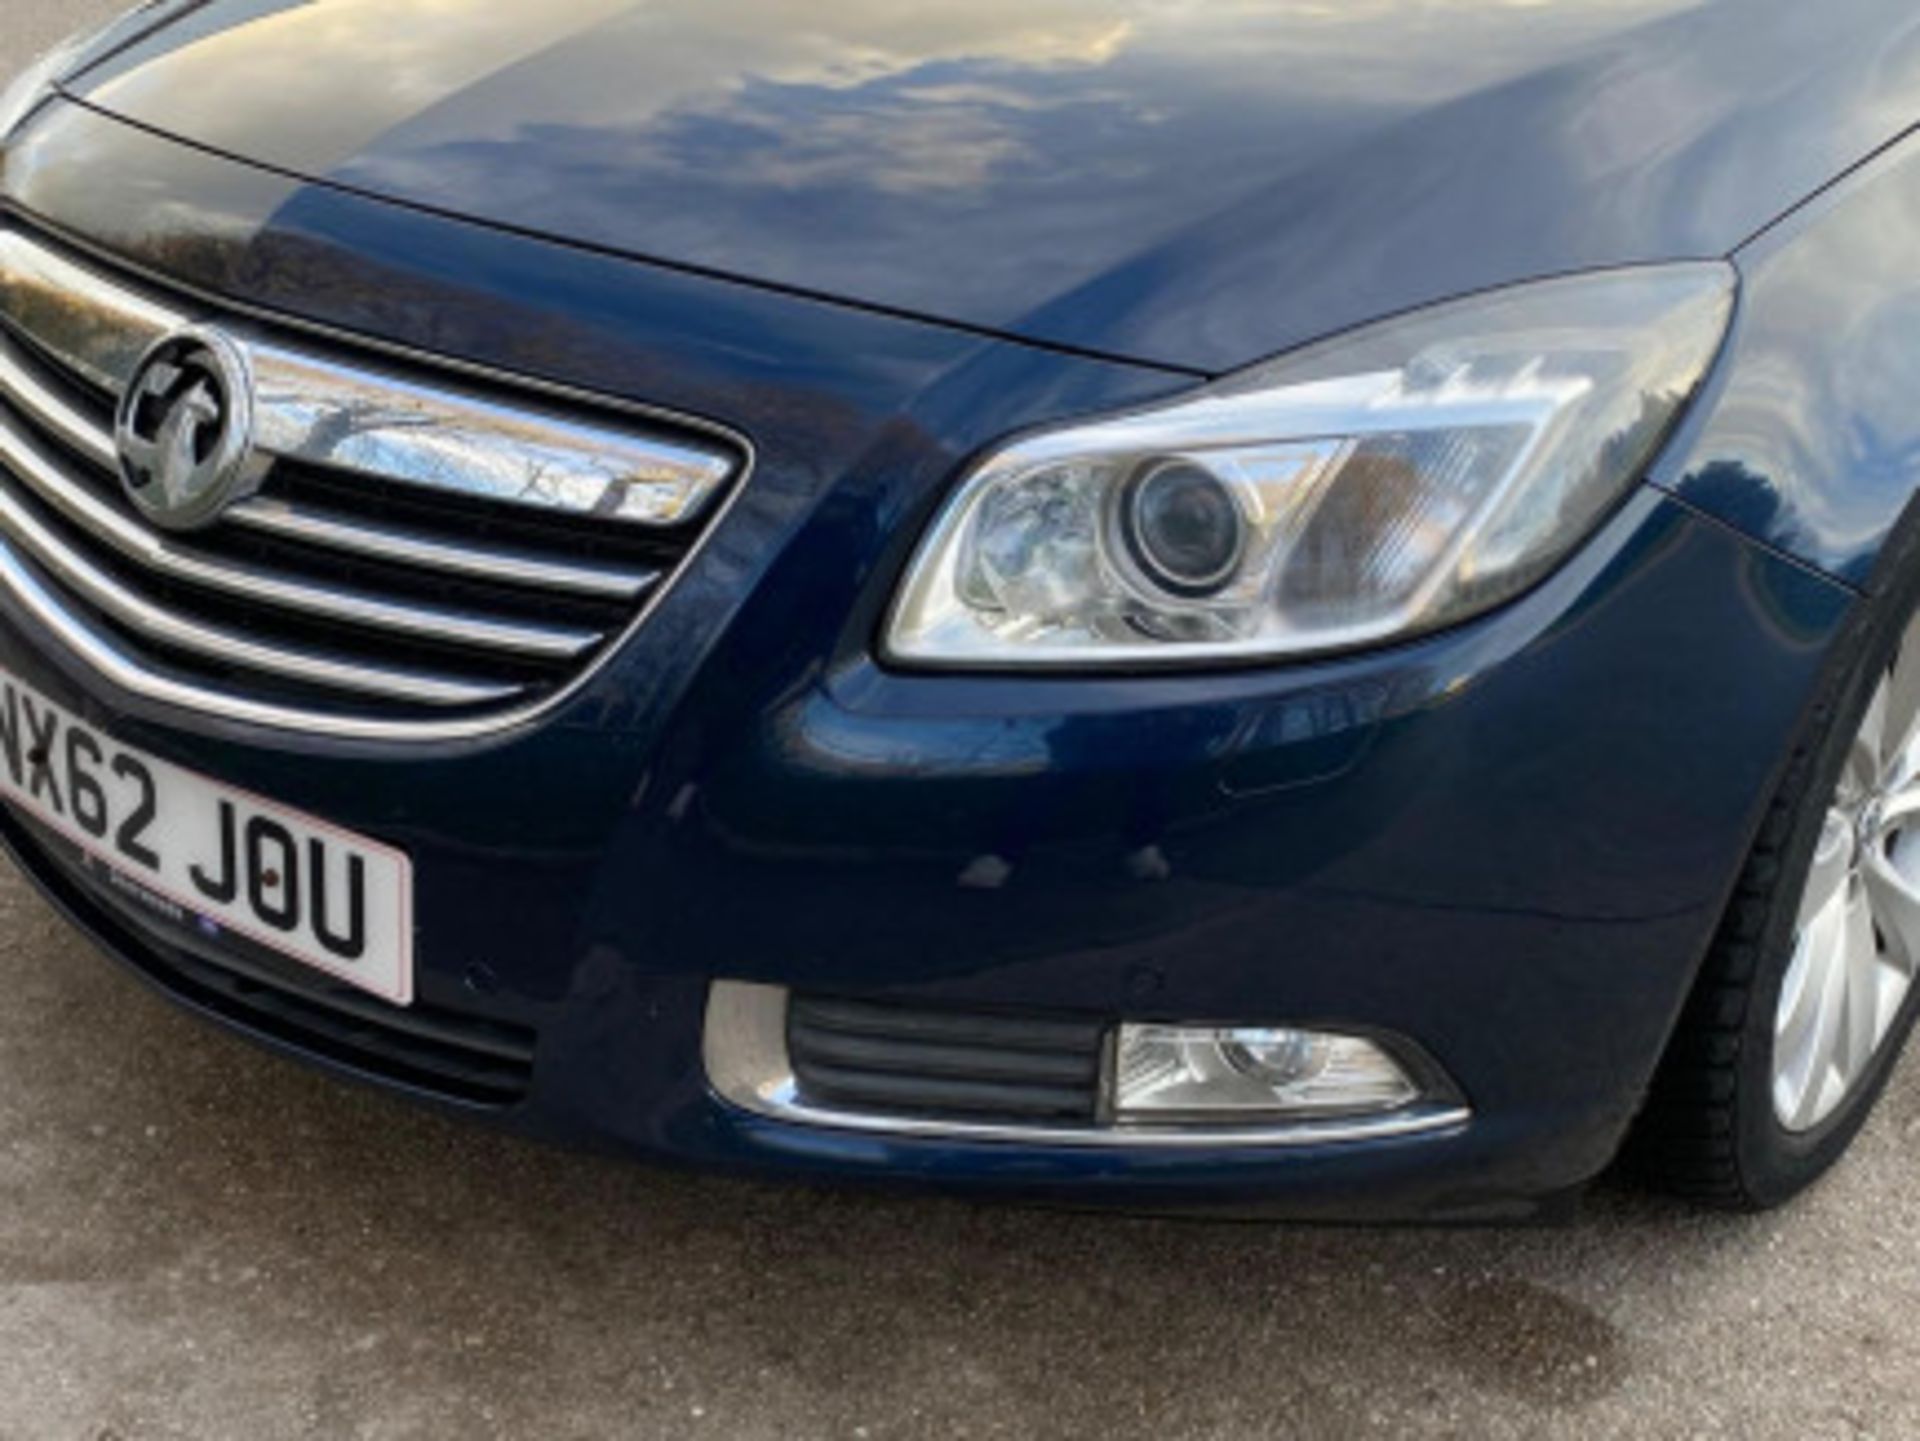 2012 VAUXHALL INSIGNIA 2.0 CDTI ELITE AUTO EURO 5 - DISCOVER EXCELLENCE >>--NO VAT ON HAMMER--<< - Image 29 of 79